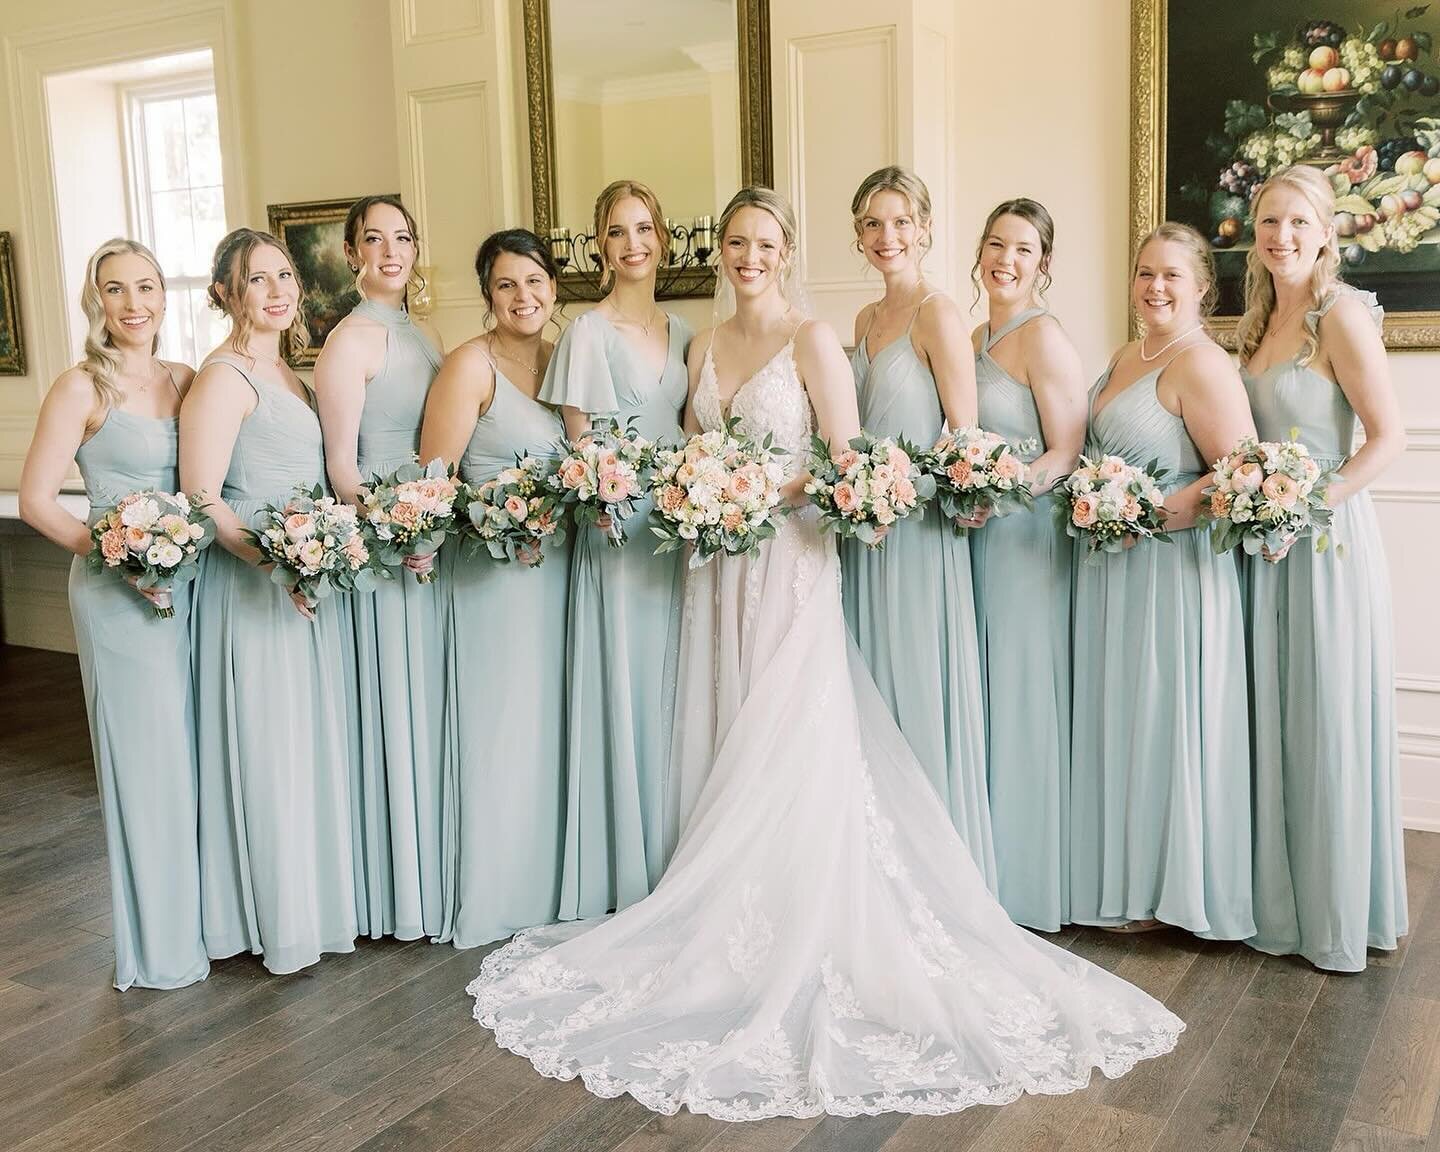 🌸 Blooming with love on this beautiful spring day! 🌼✨ Allyson and her radiant bridesmaids usher in the season last year of new beginnings with smiles as bright as the blossoms around them. Here&rsquo;s to love in full bloom and cherished memories m